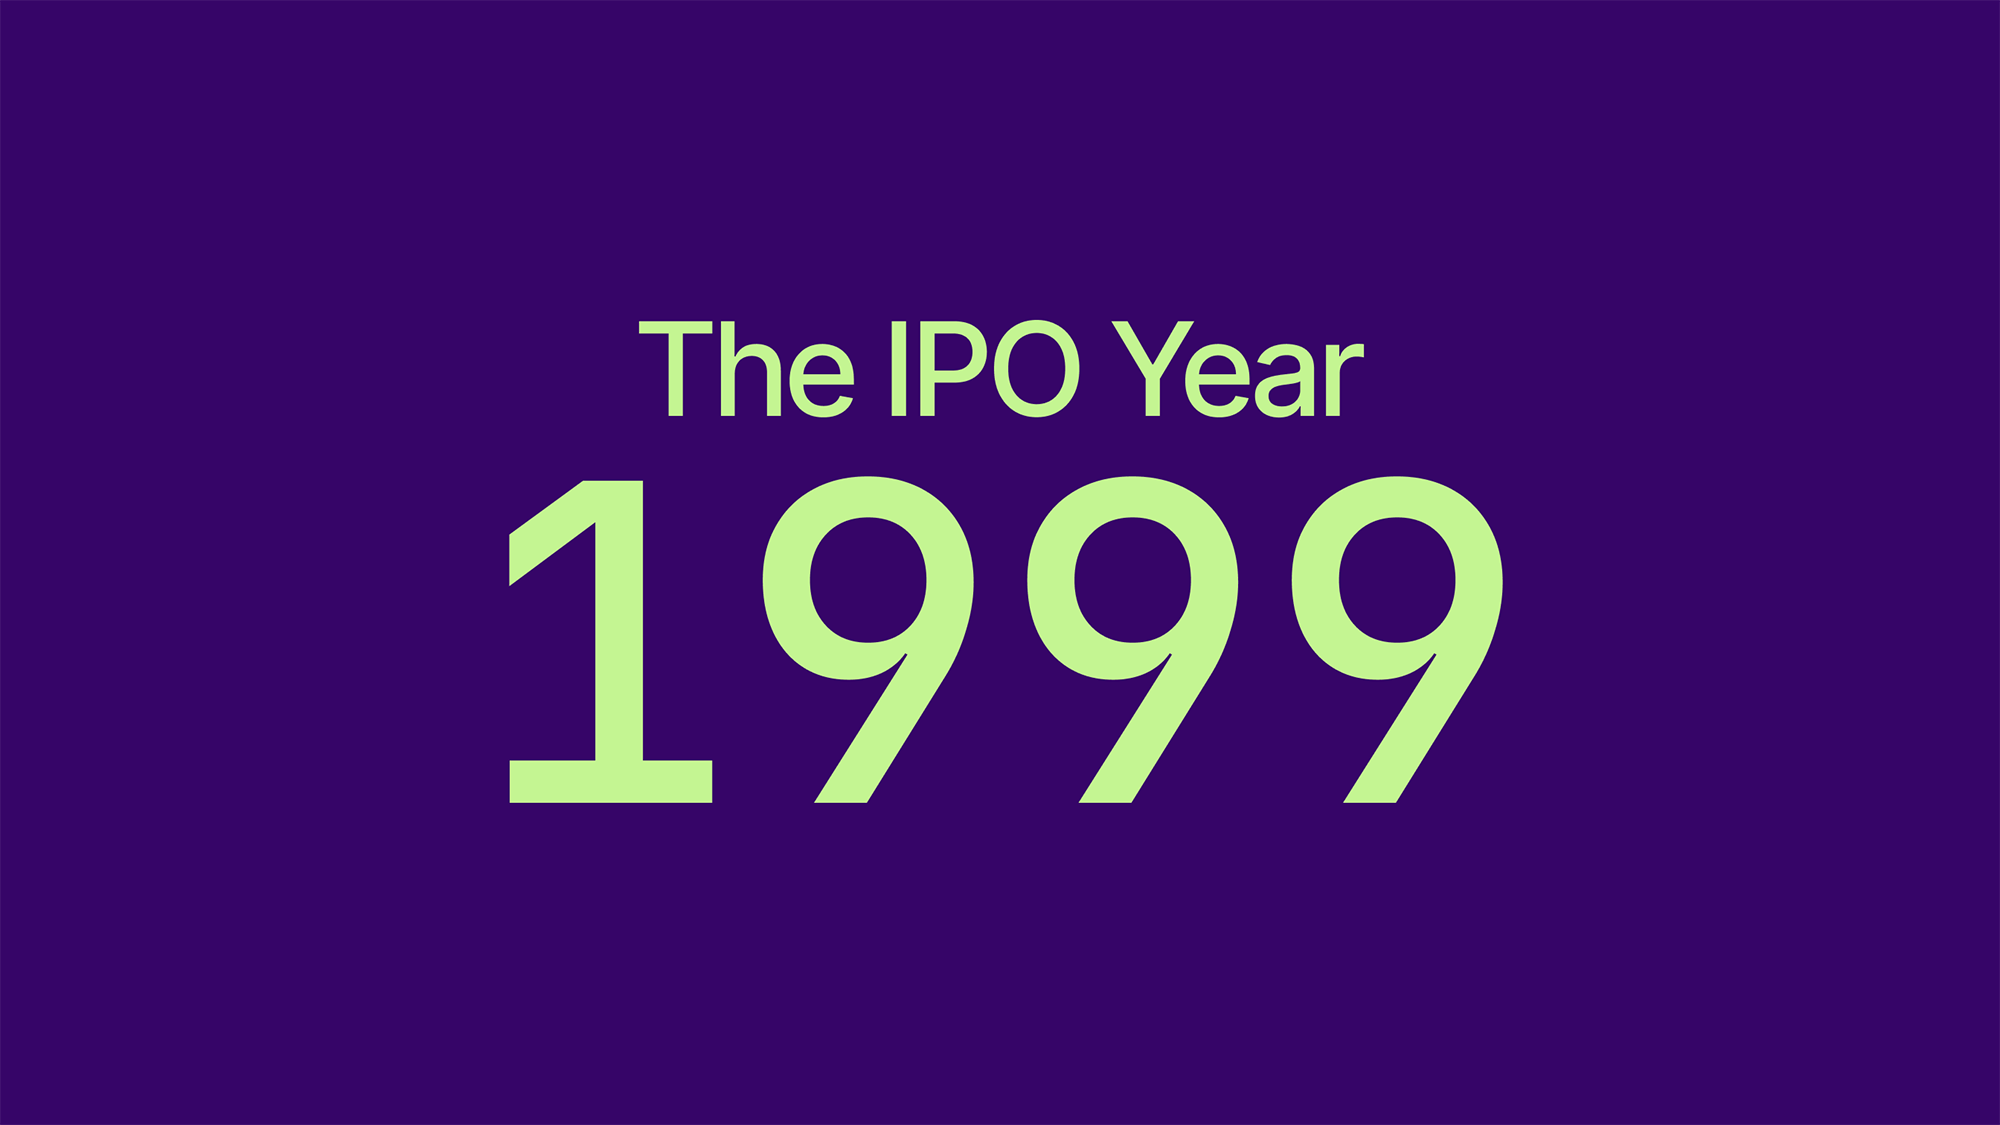 Exploring companies that had their IPO in 1999